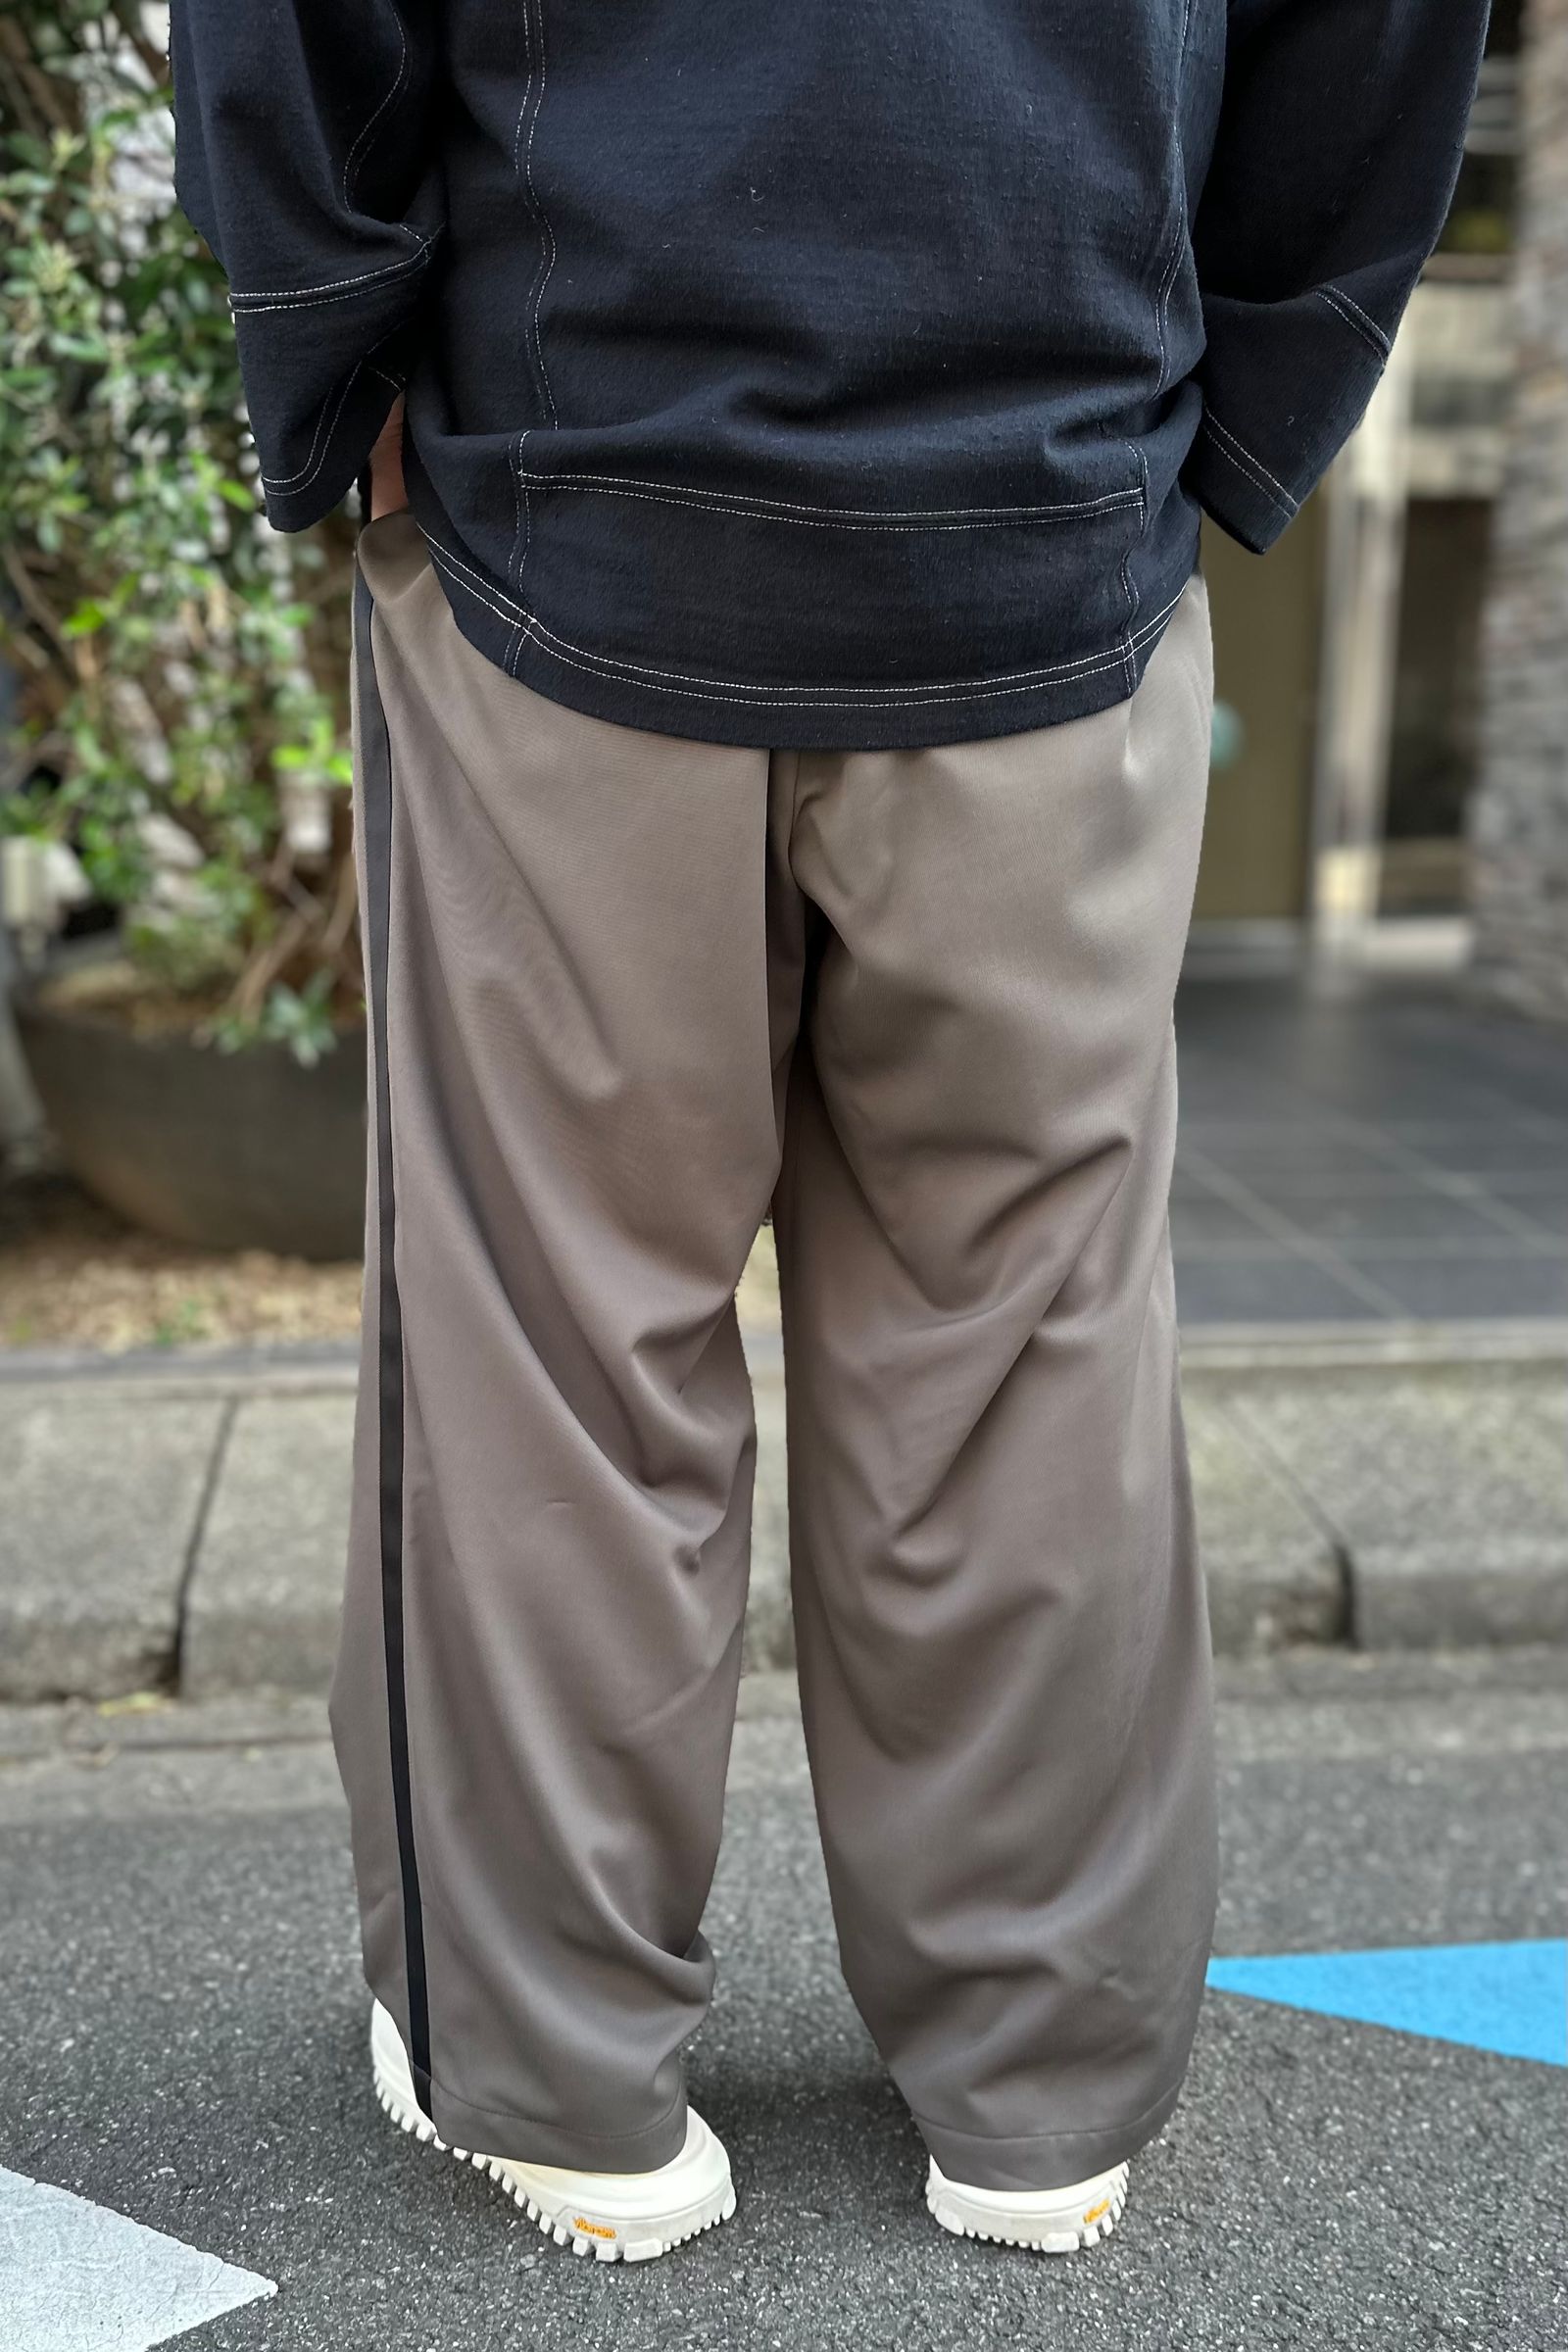 WEWILL - informal trousers -khaki- 23aw | asterisk